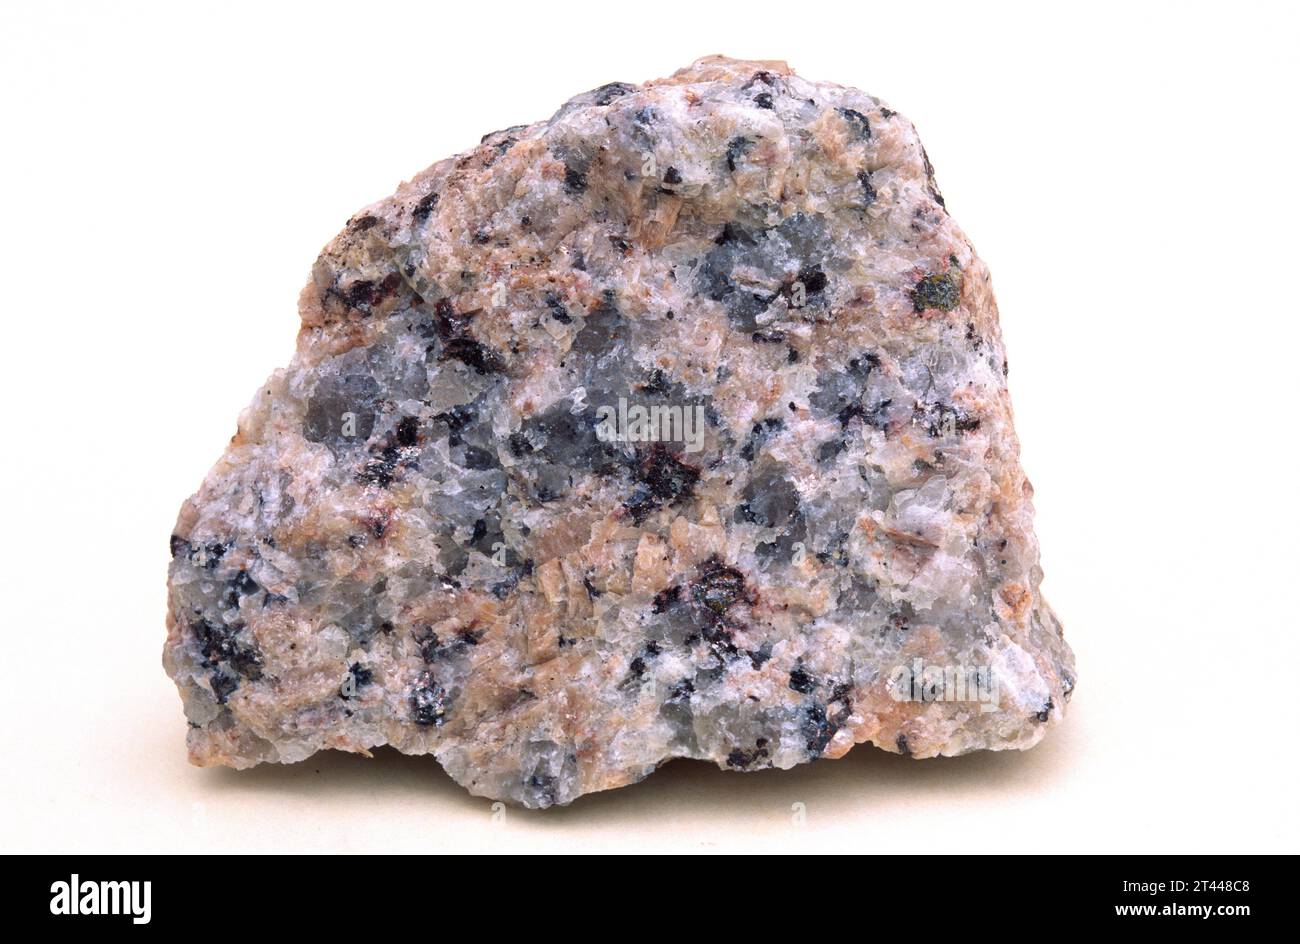 Pink granite. Granite is an igneous intrusive rock with holocrystalline texture. Sample. Stock Photo